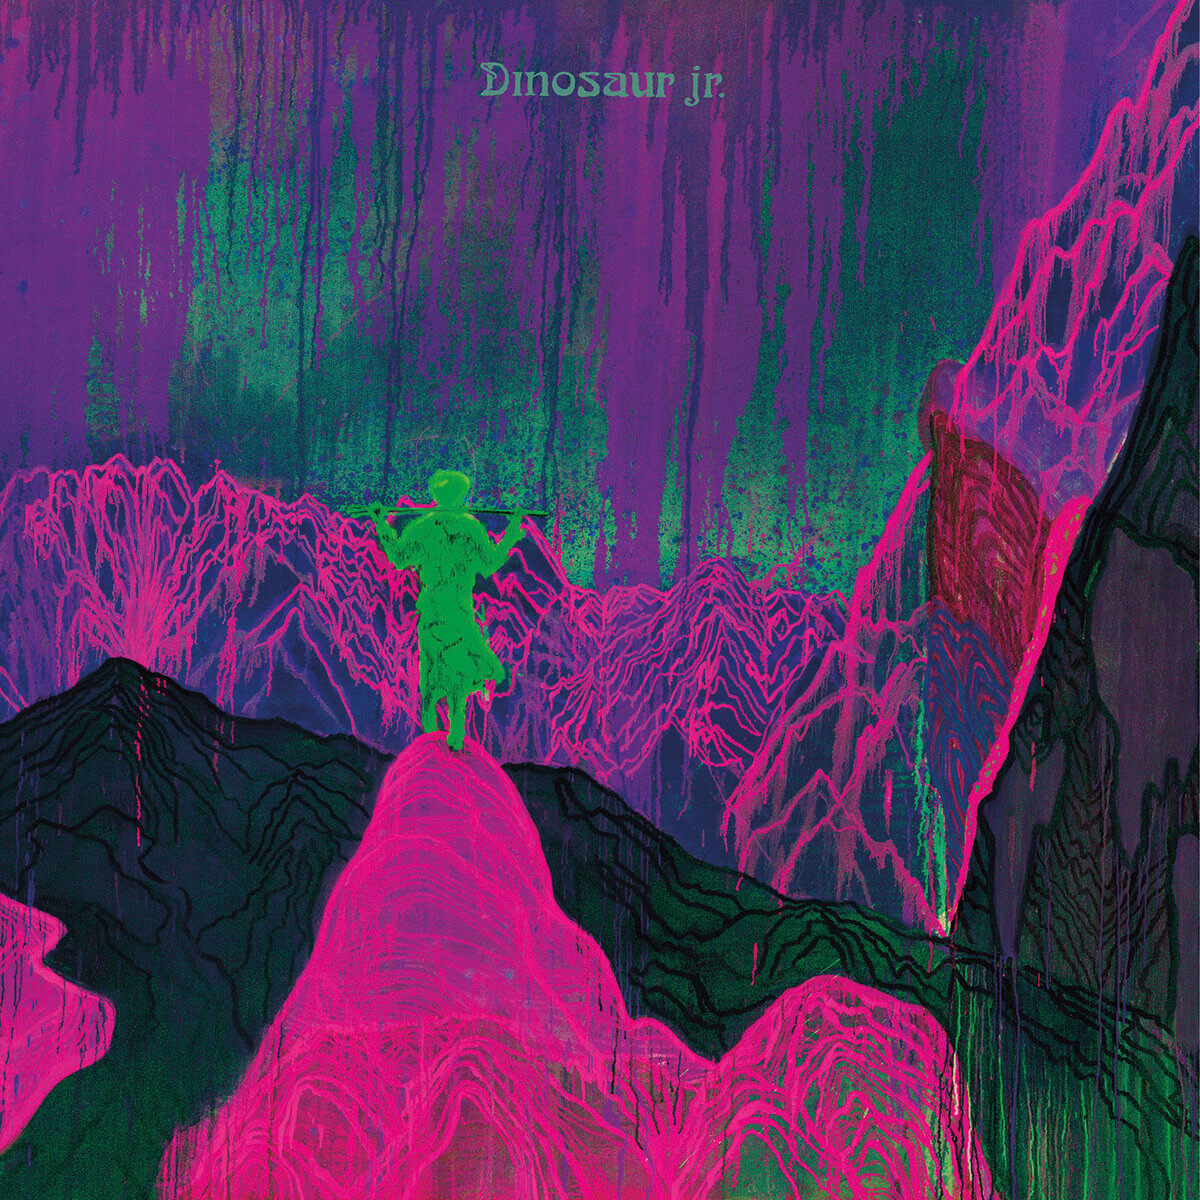 Dinosaur Jr. ‘Give a Glimpse of What Yer Not’ Album Review